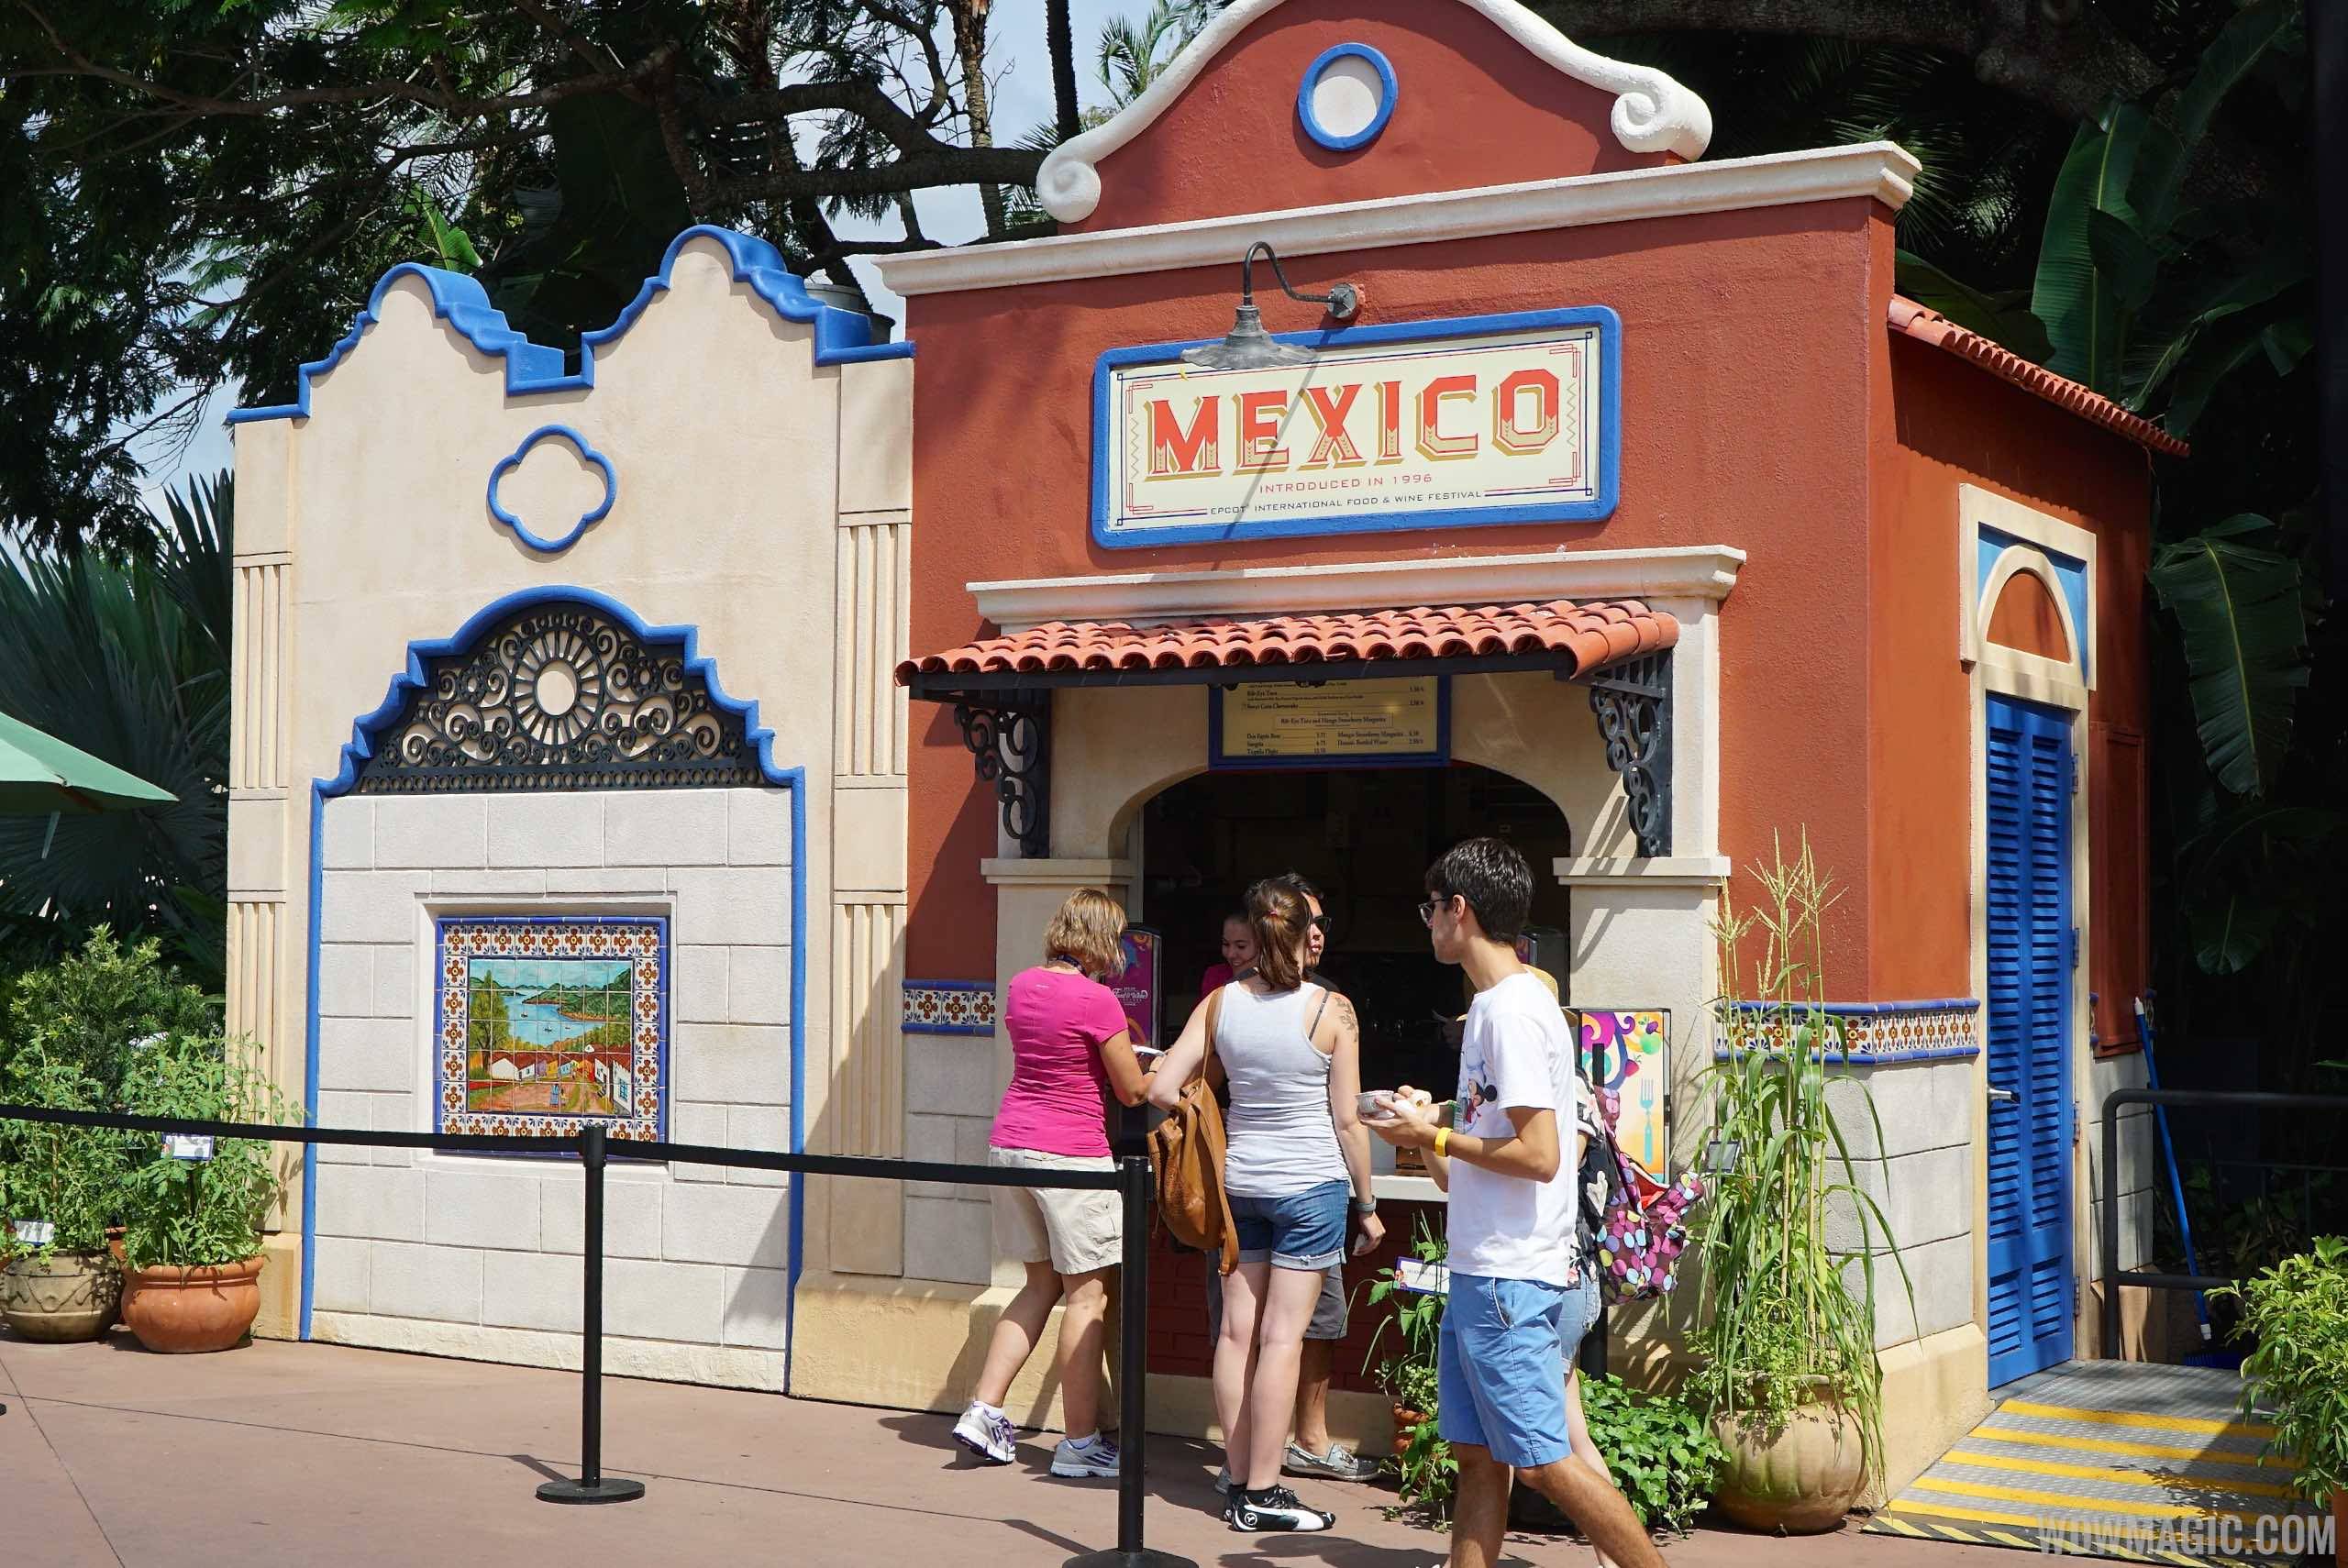 Mexico Food and Wine kiosk